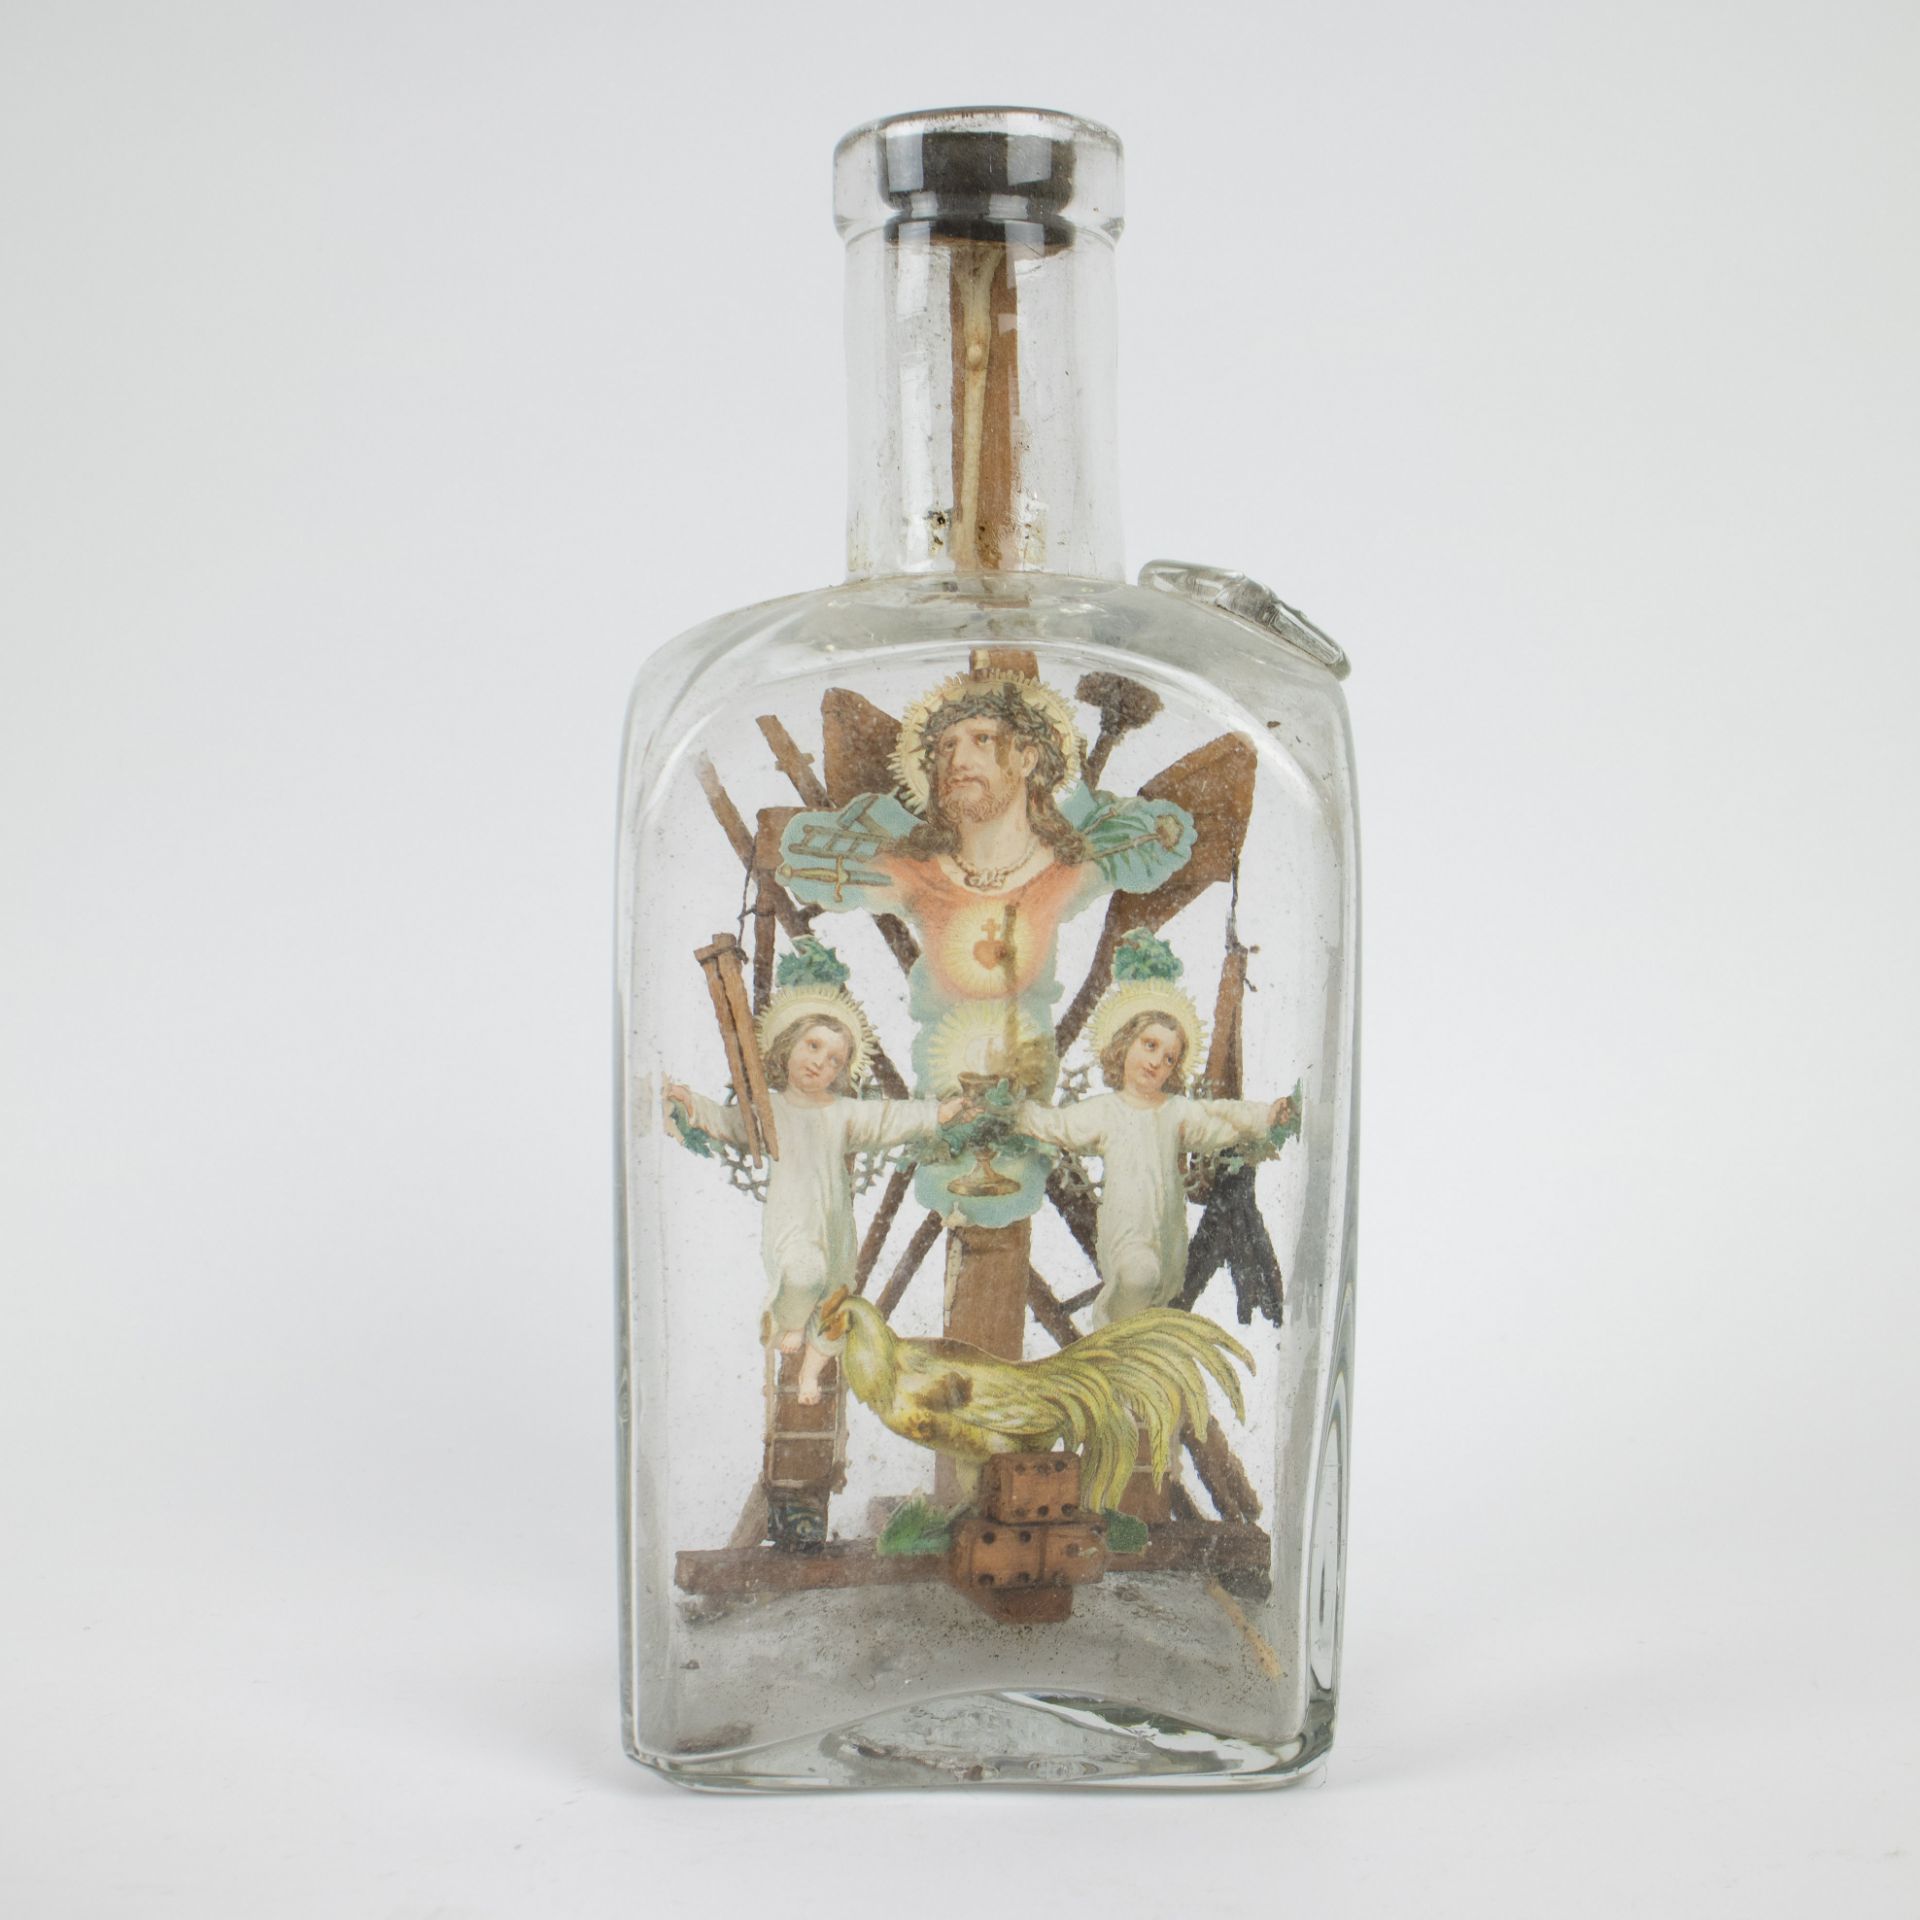 A collection of religious items consisting of a relic, a relic beguine Theressia Verhaeghe, a bottle - Image 2 of 8